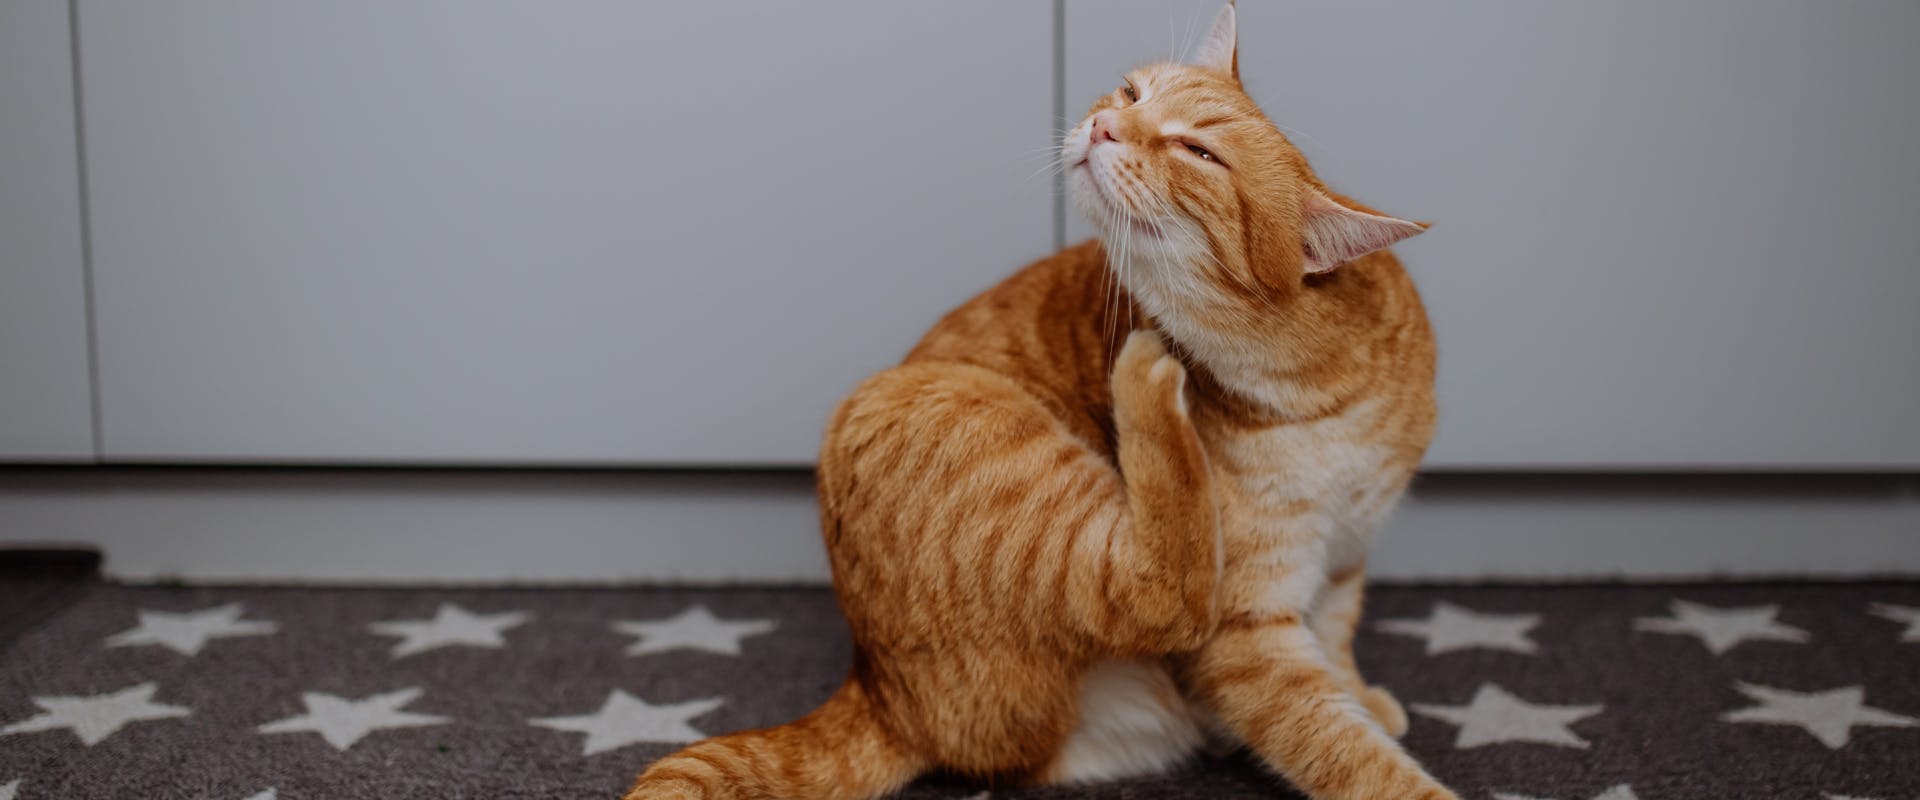 ginger cat scratching its neck on a kitchen floor